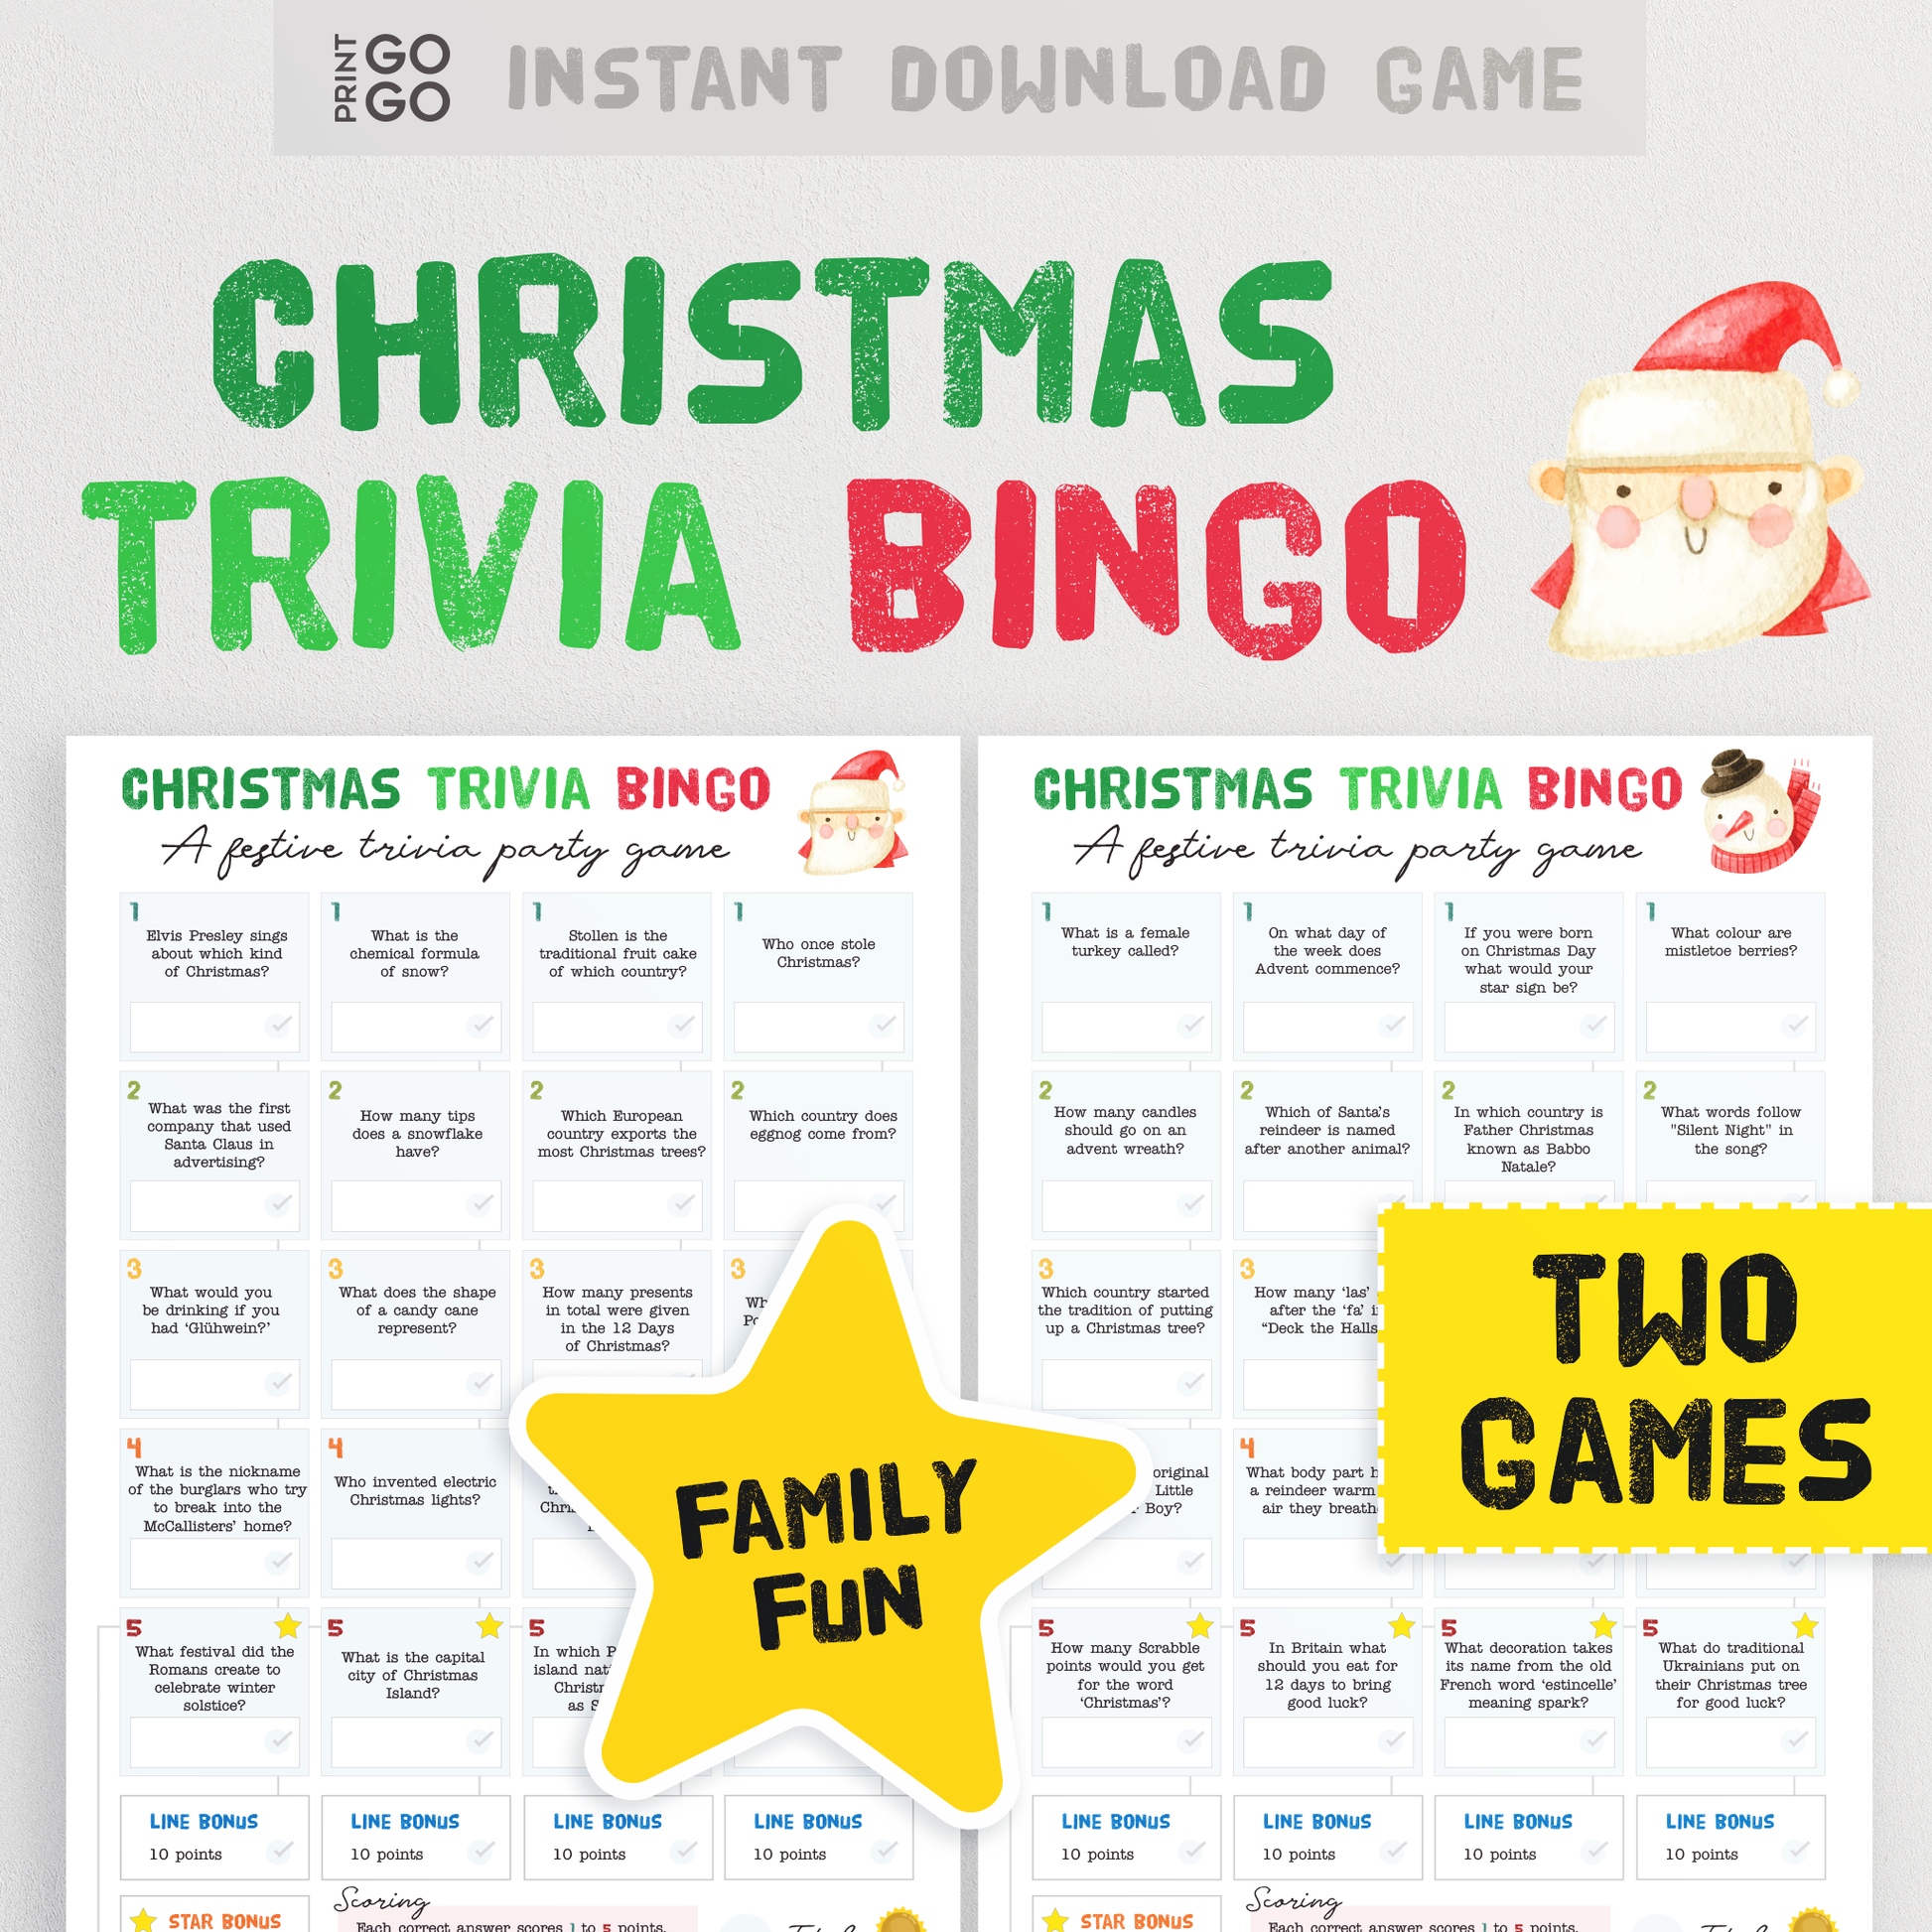 Christmas Trivia Bingo - Test Your Holiday Knowledge With This Fun Family Quiz Party Game | Christmas Day Entertainment | Printable PDF Game